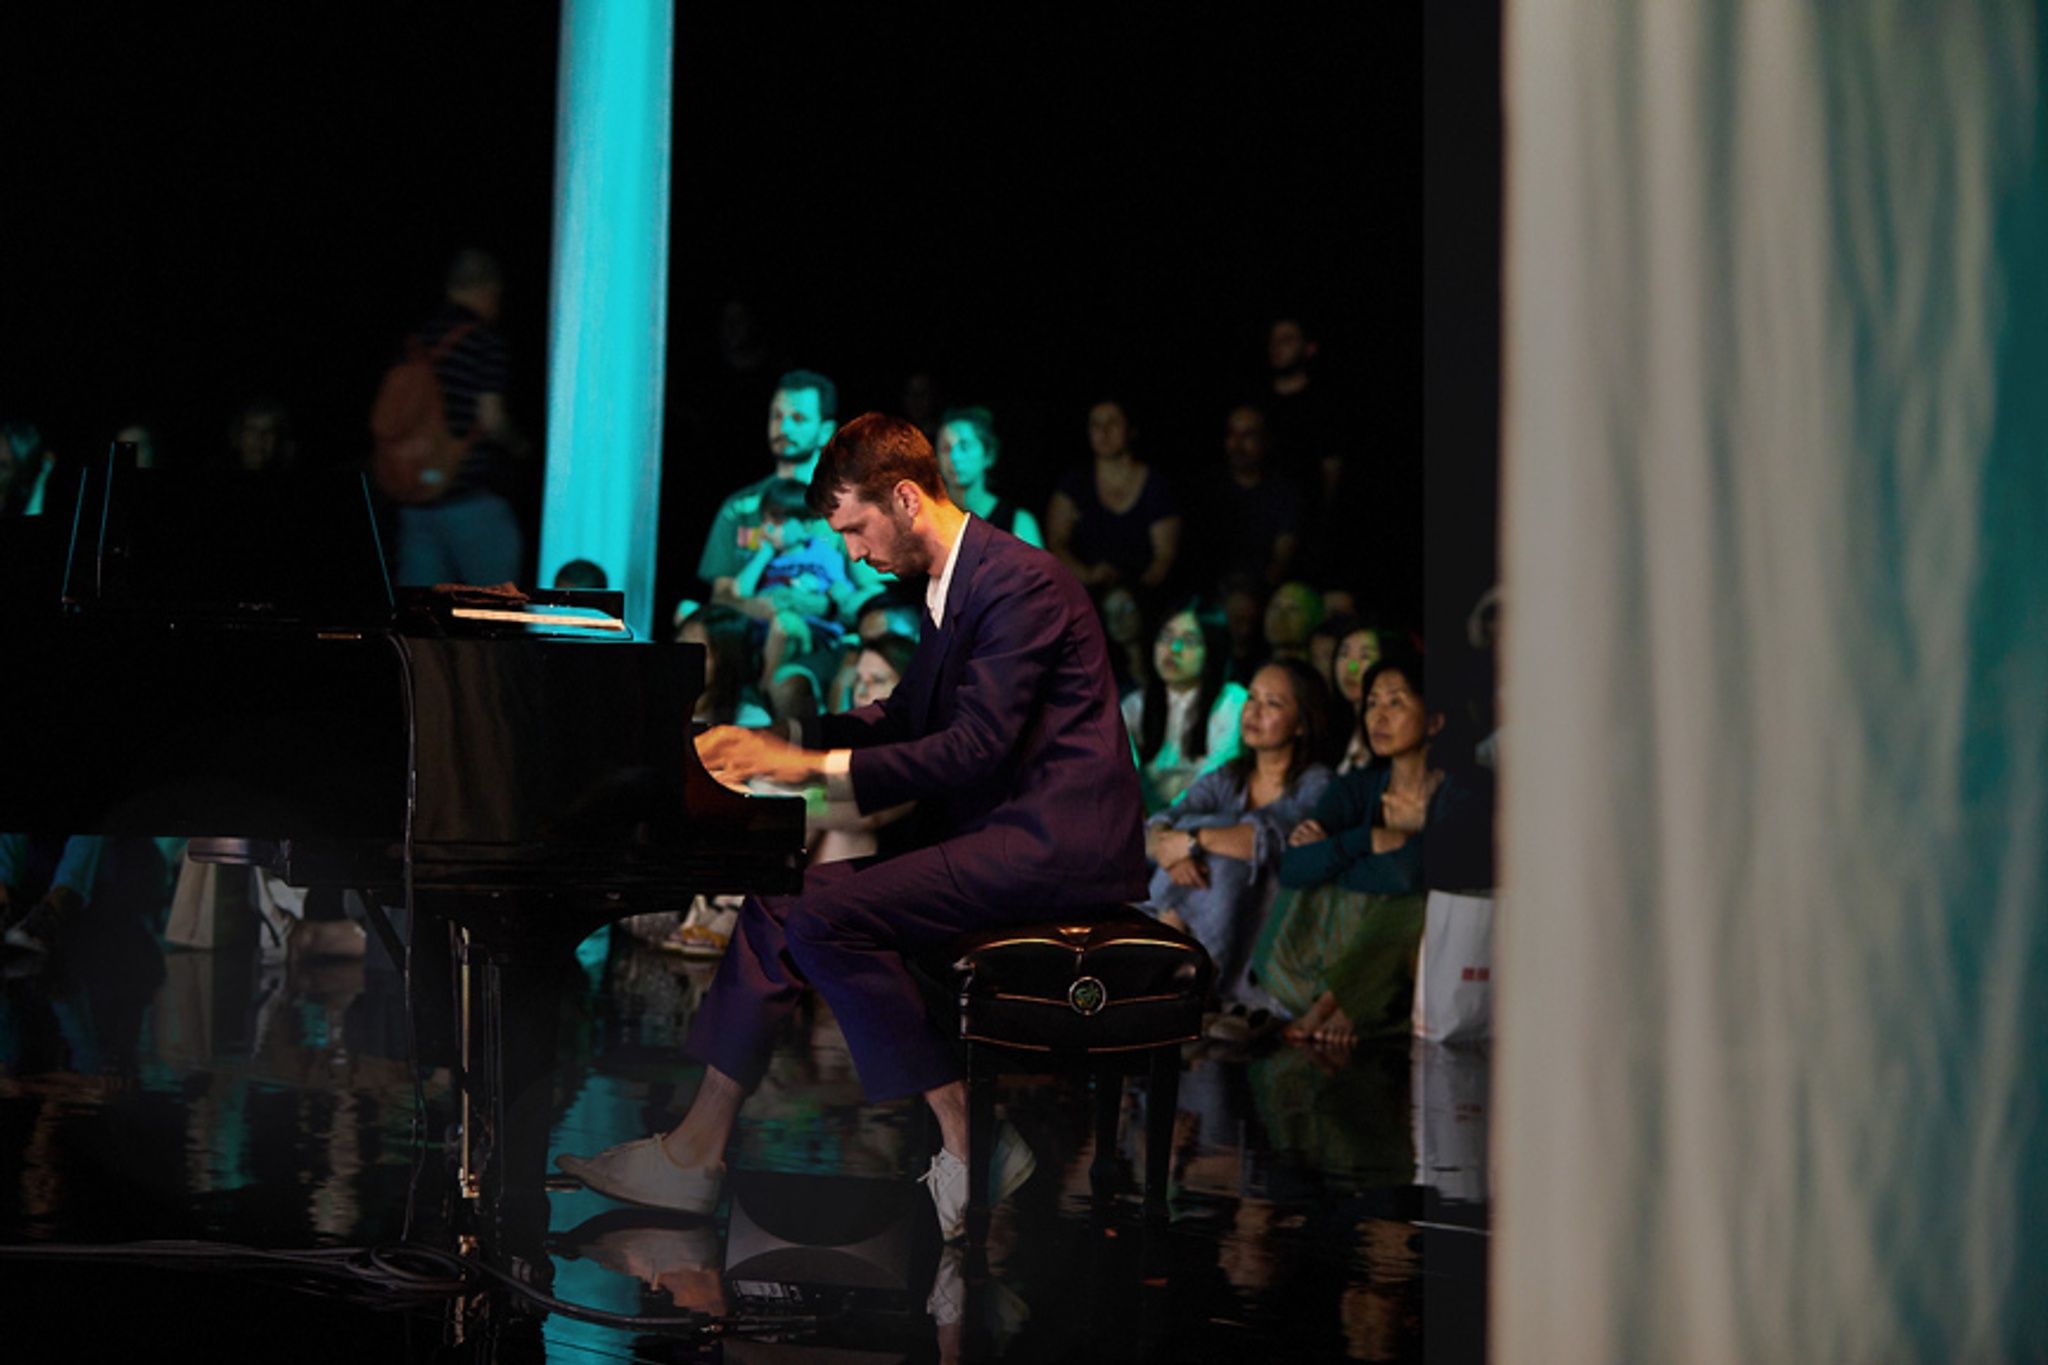 Pianist playing in front of large screens in blue-lit space.